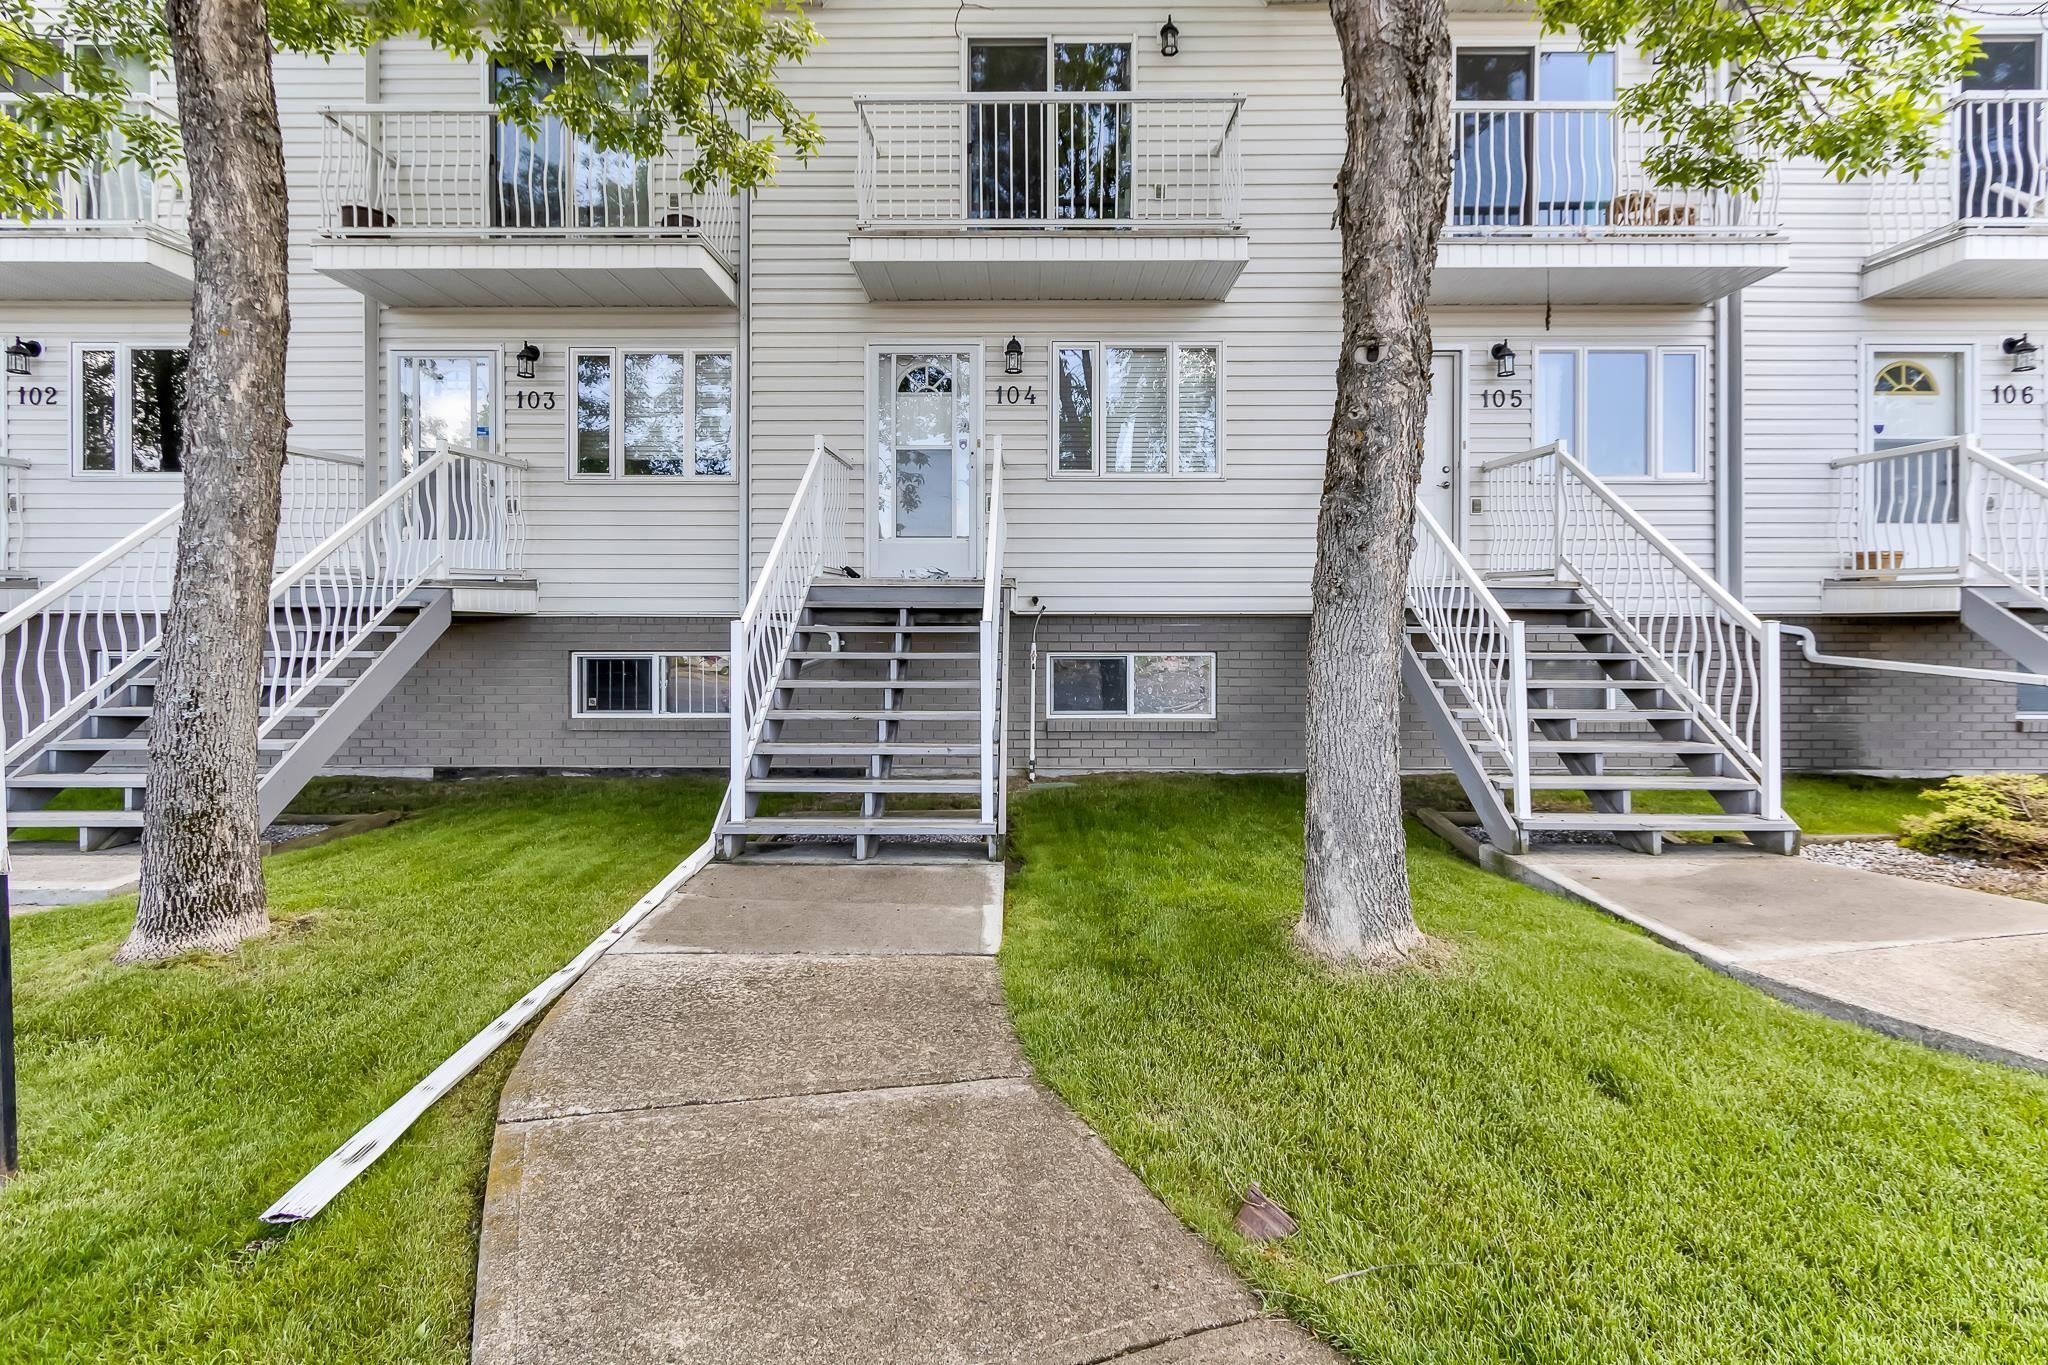 Open House. Open House on Sunday, June 26, 2022 2:30PM - 4:00PM
Join France Morissette and check out this beautiful townhouse. You're sure to love the great location!